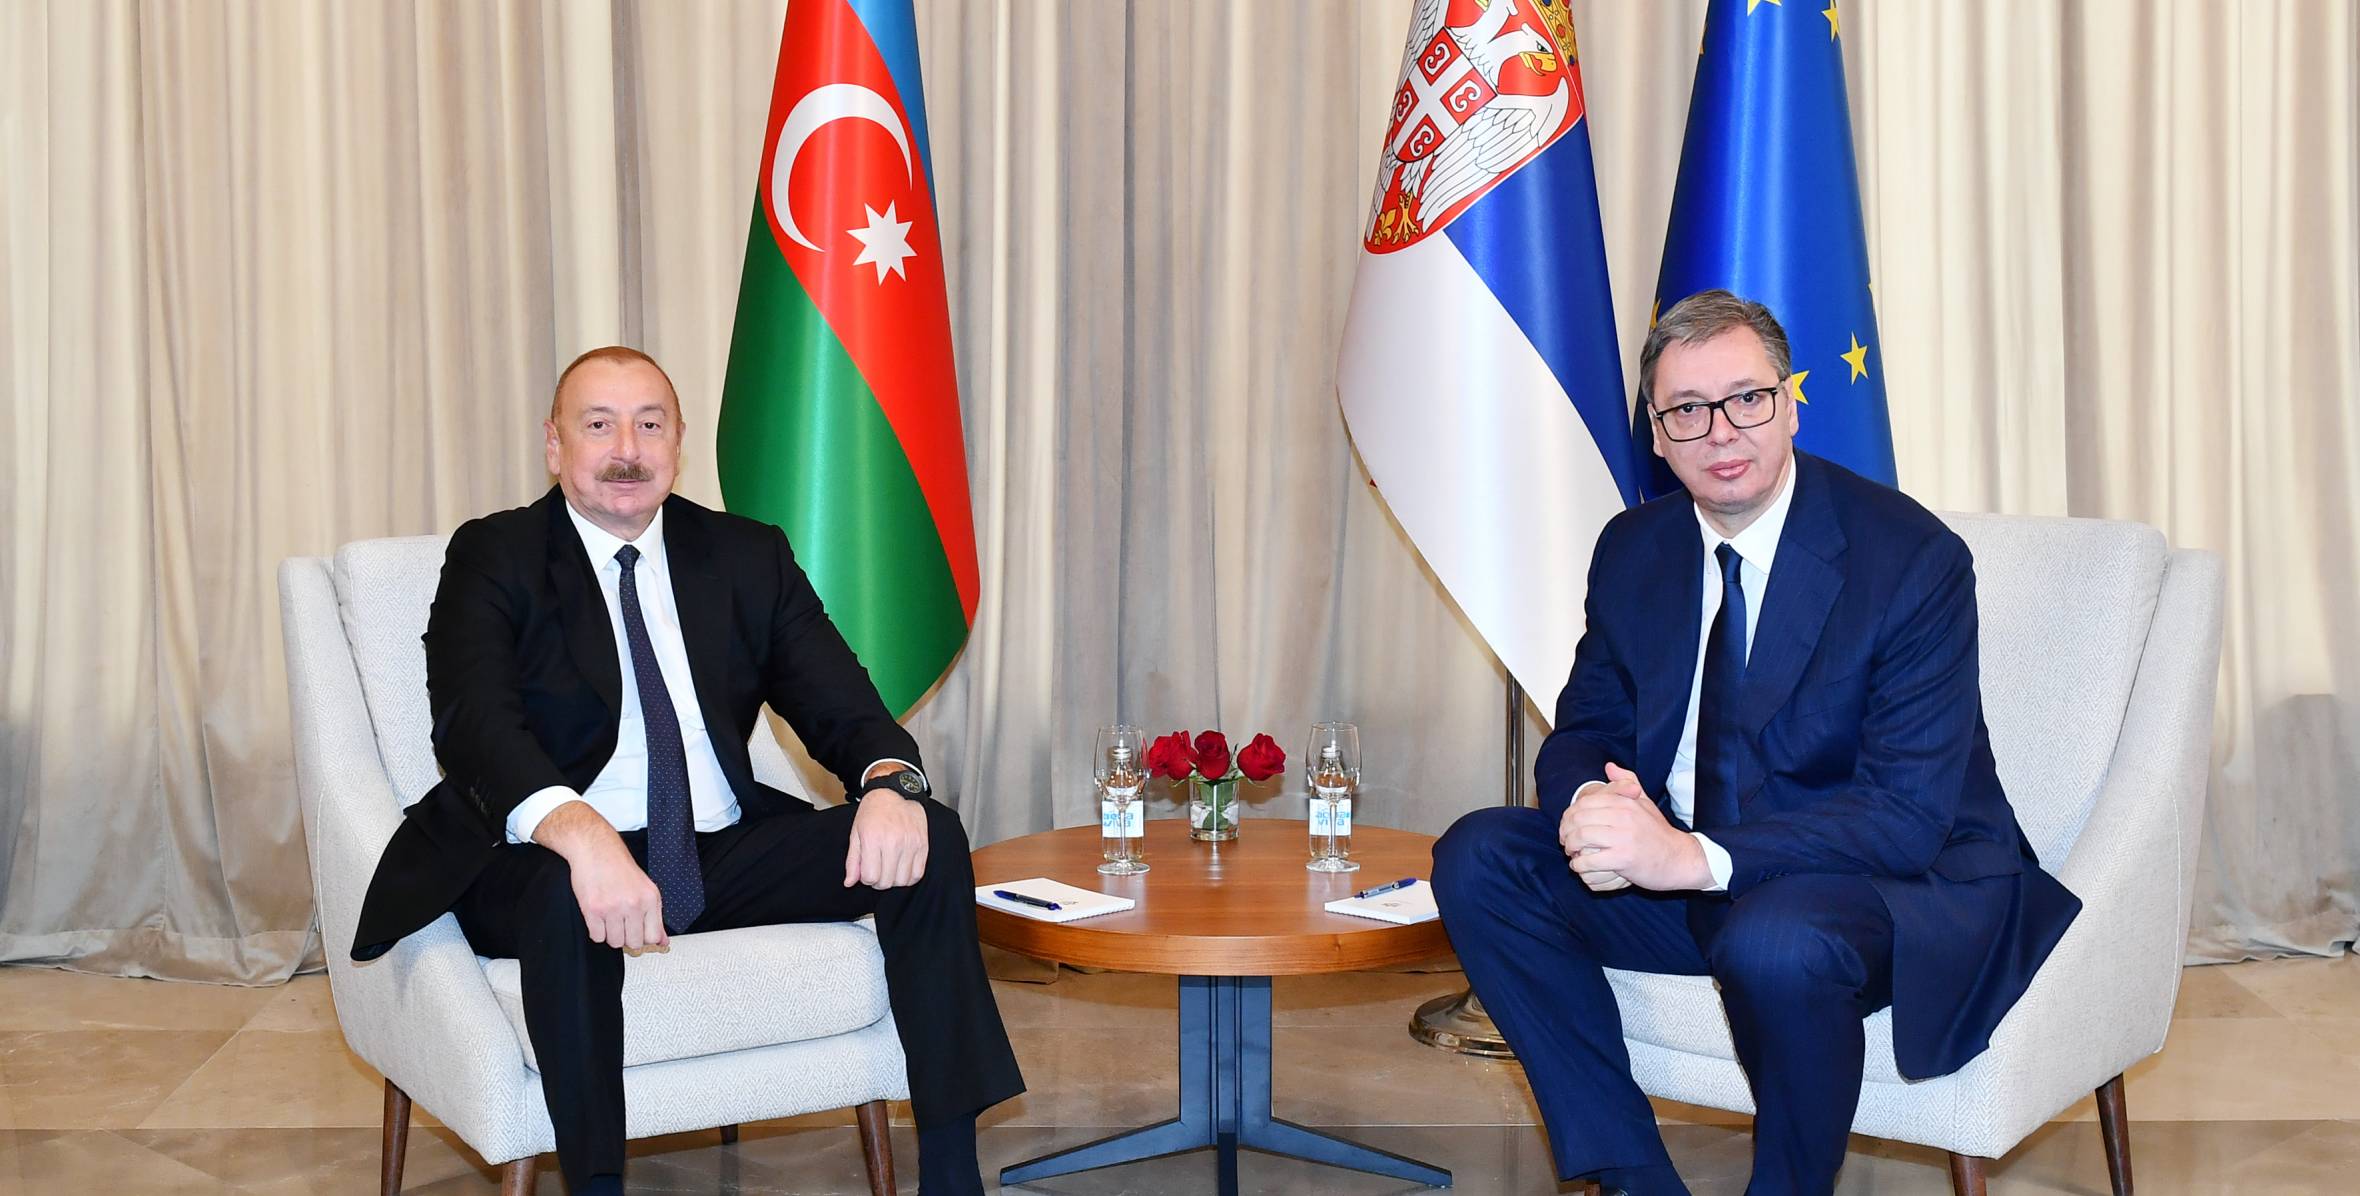 Ilham Aliyev held one-on-one and expanded meetings with President of Serbia Aleksandar Vučić